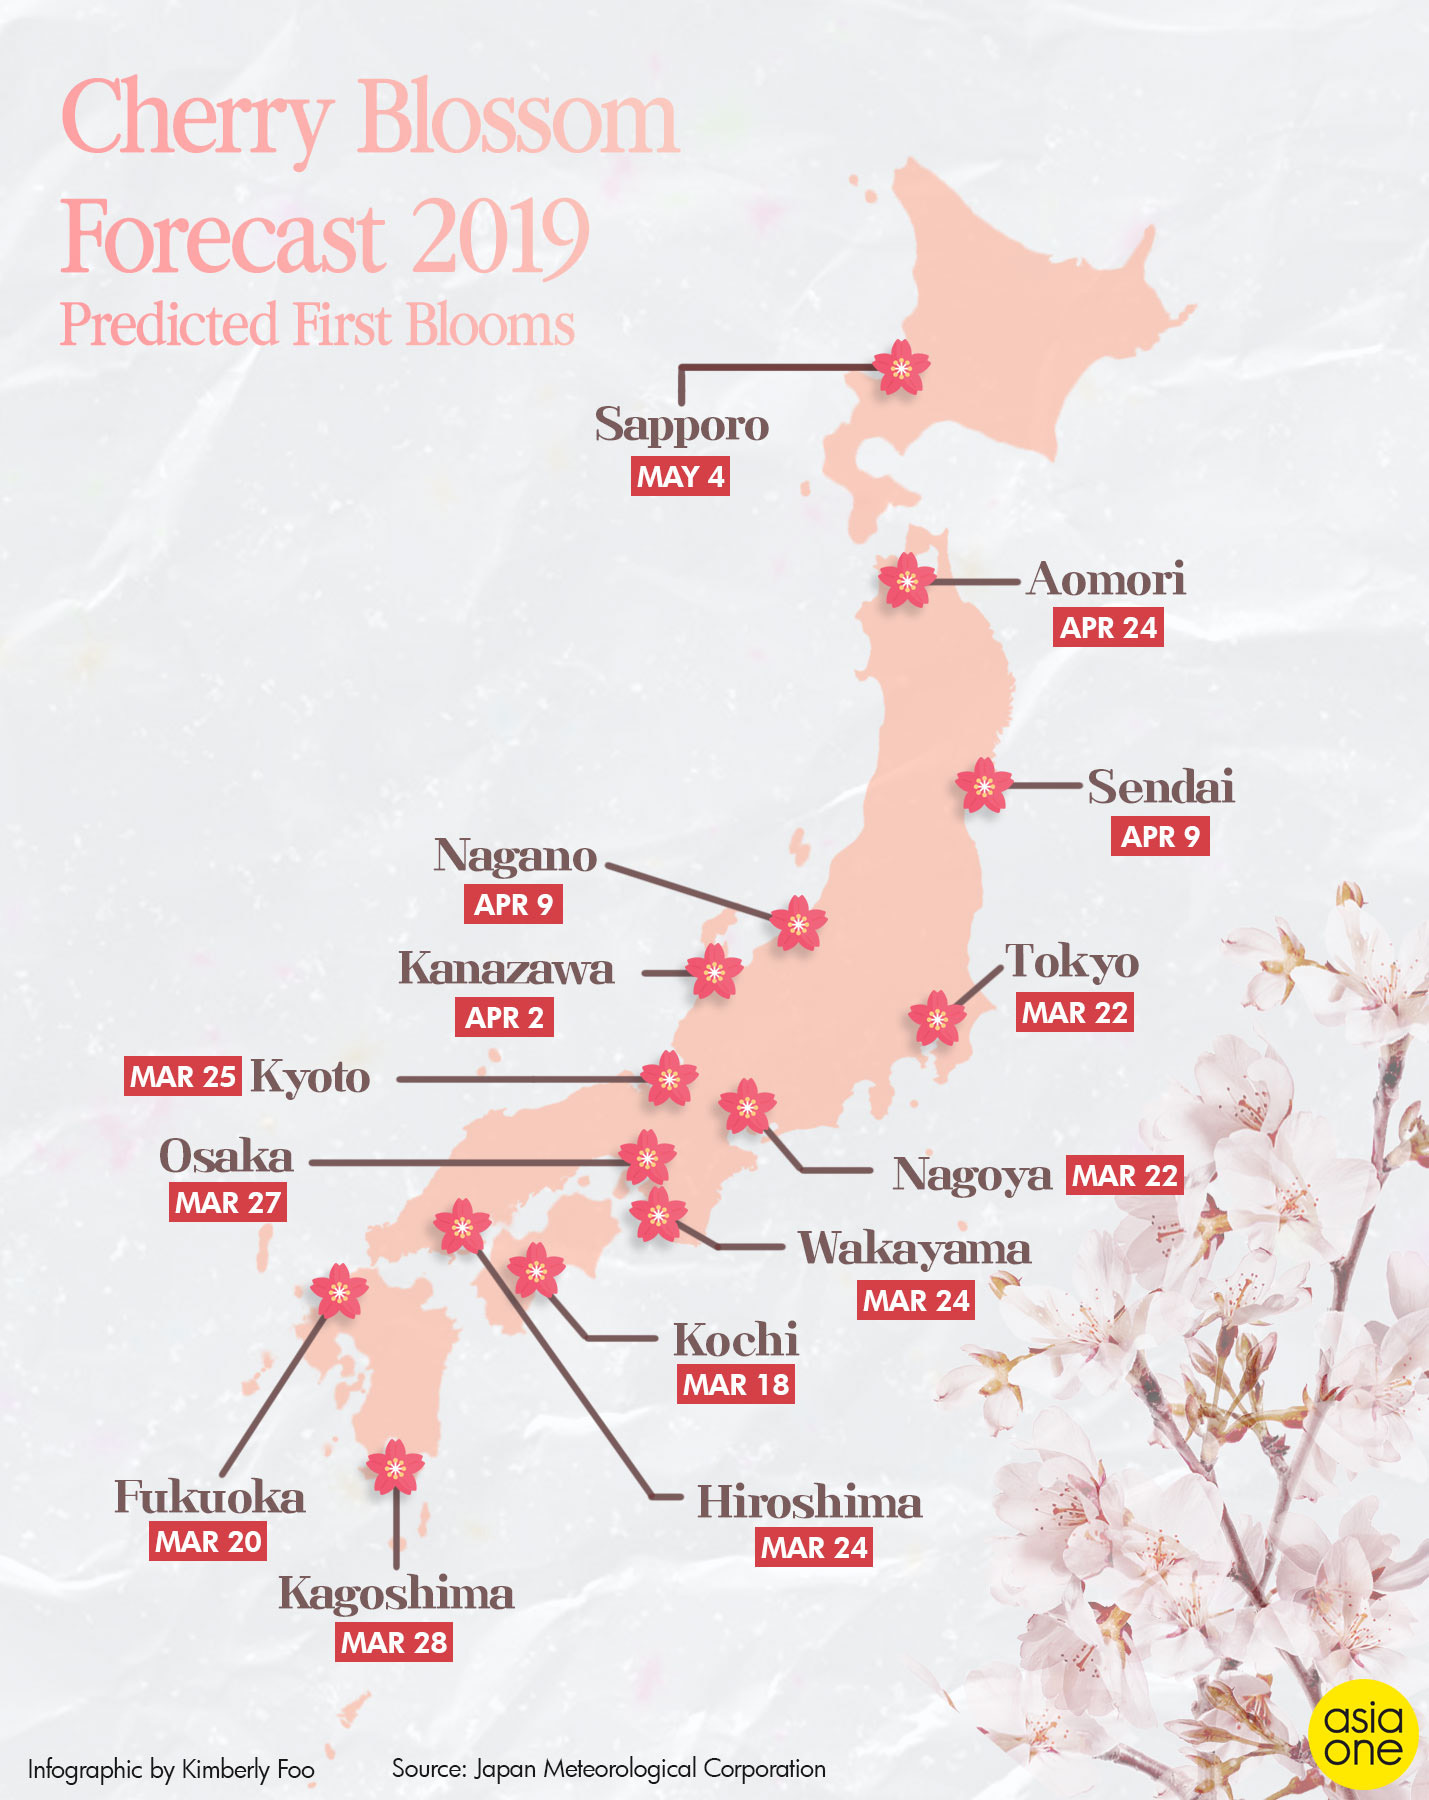 sakura-season-in-japan-forecast-to-start-earlier-this-year-from-mid-march-travel-news-asiaone